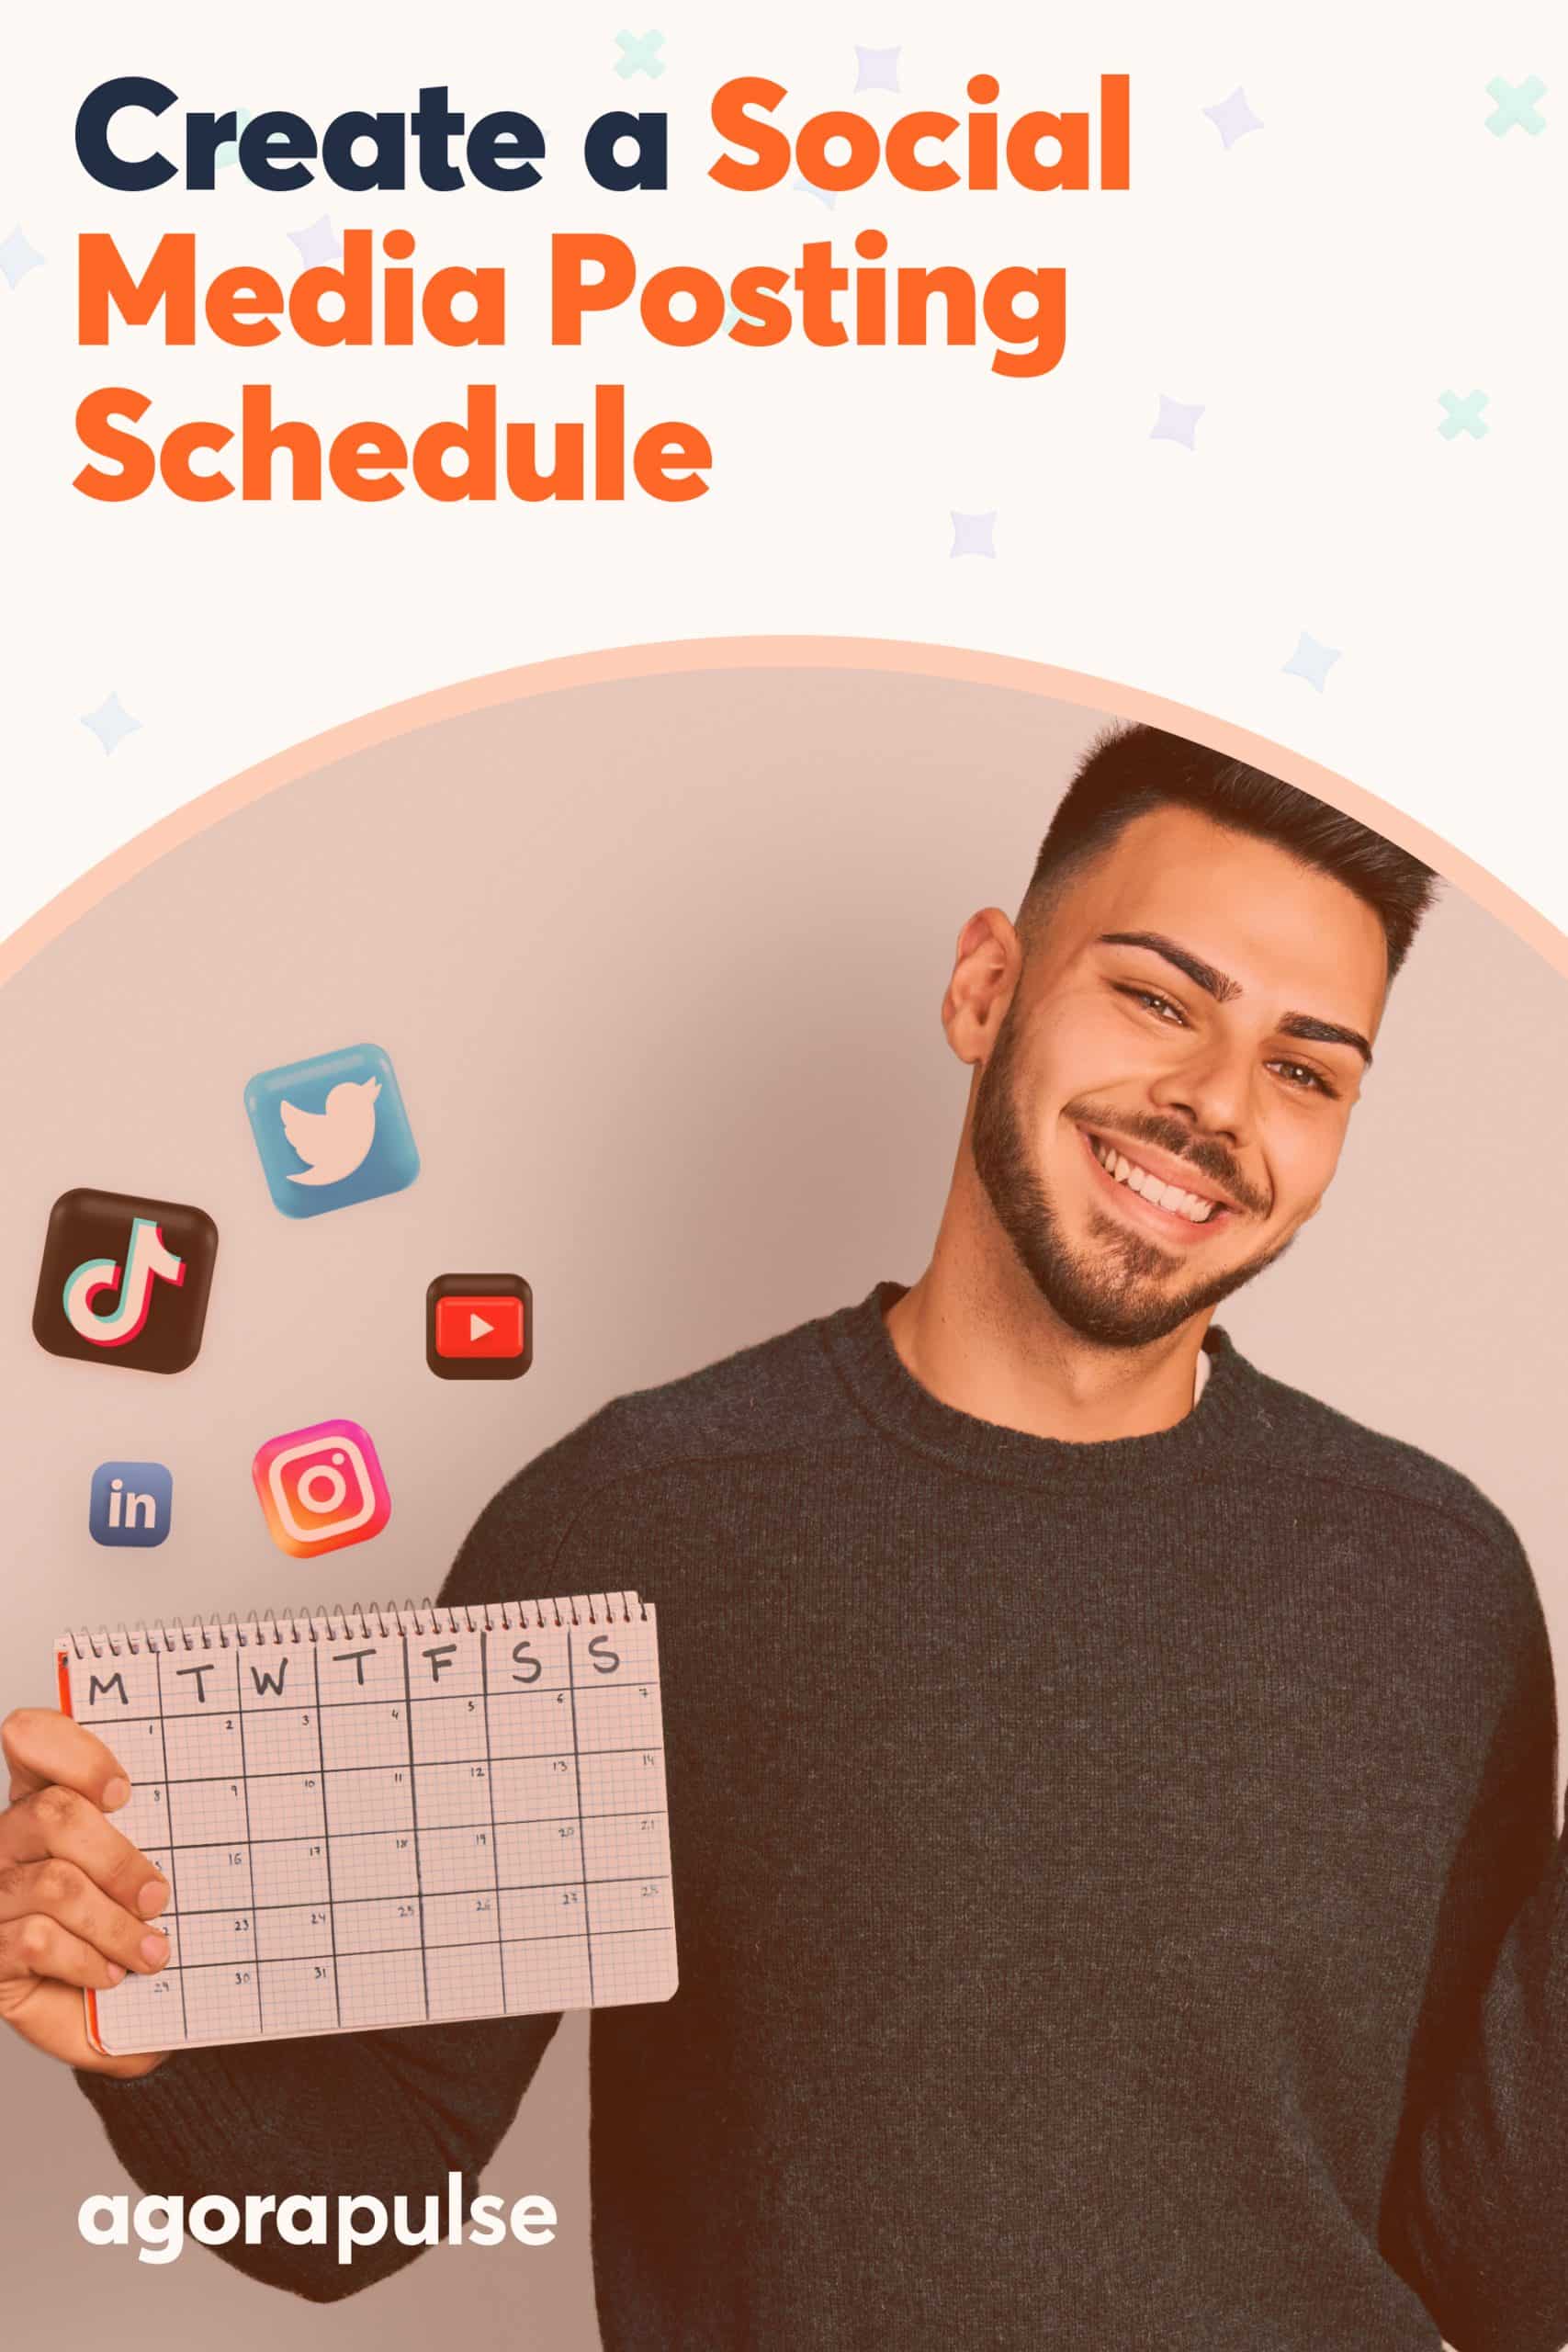 How to Create the Perfect Social Media Post Schedule in Less Time Than You Think